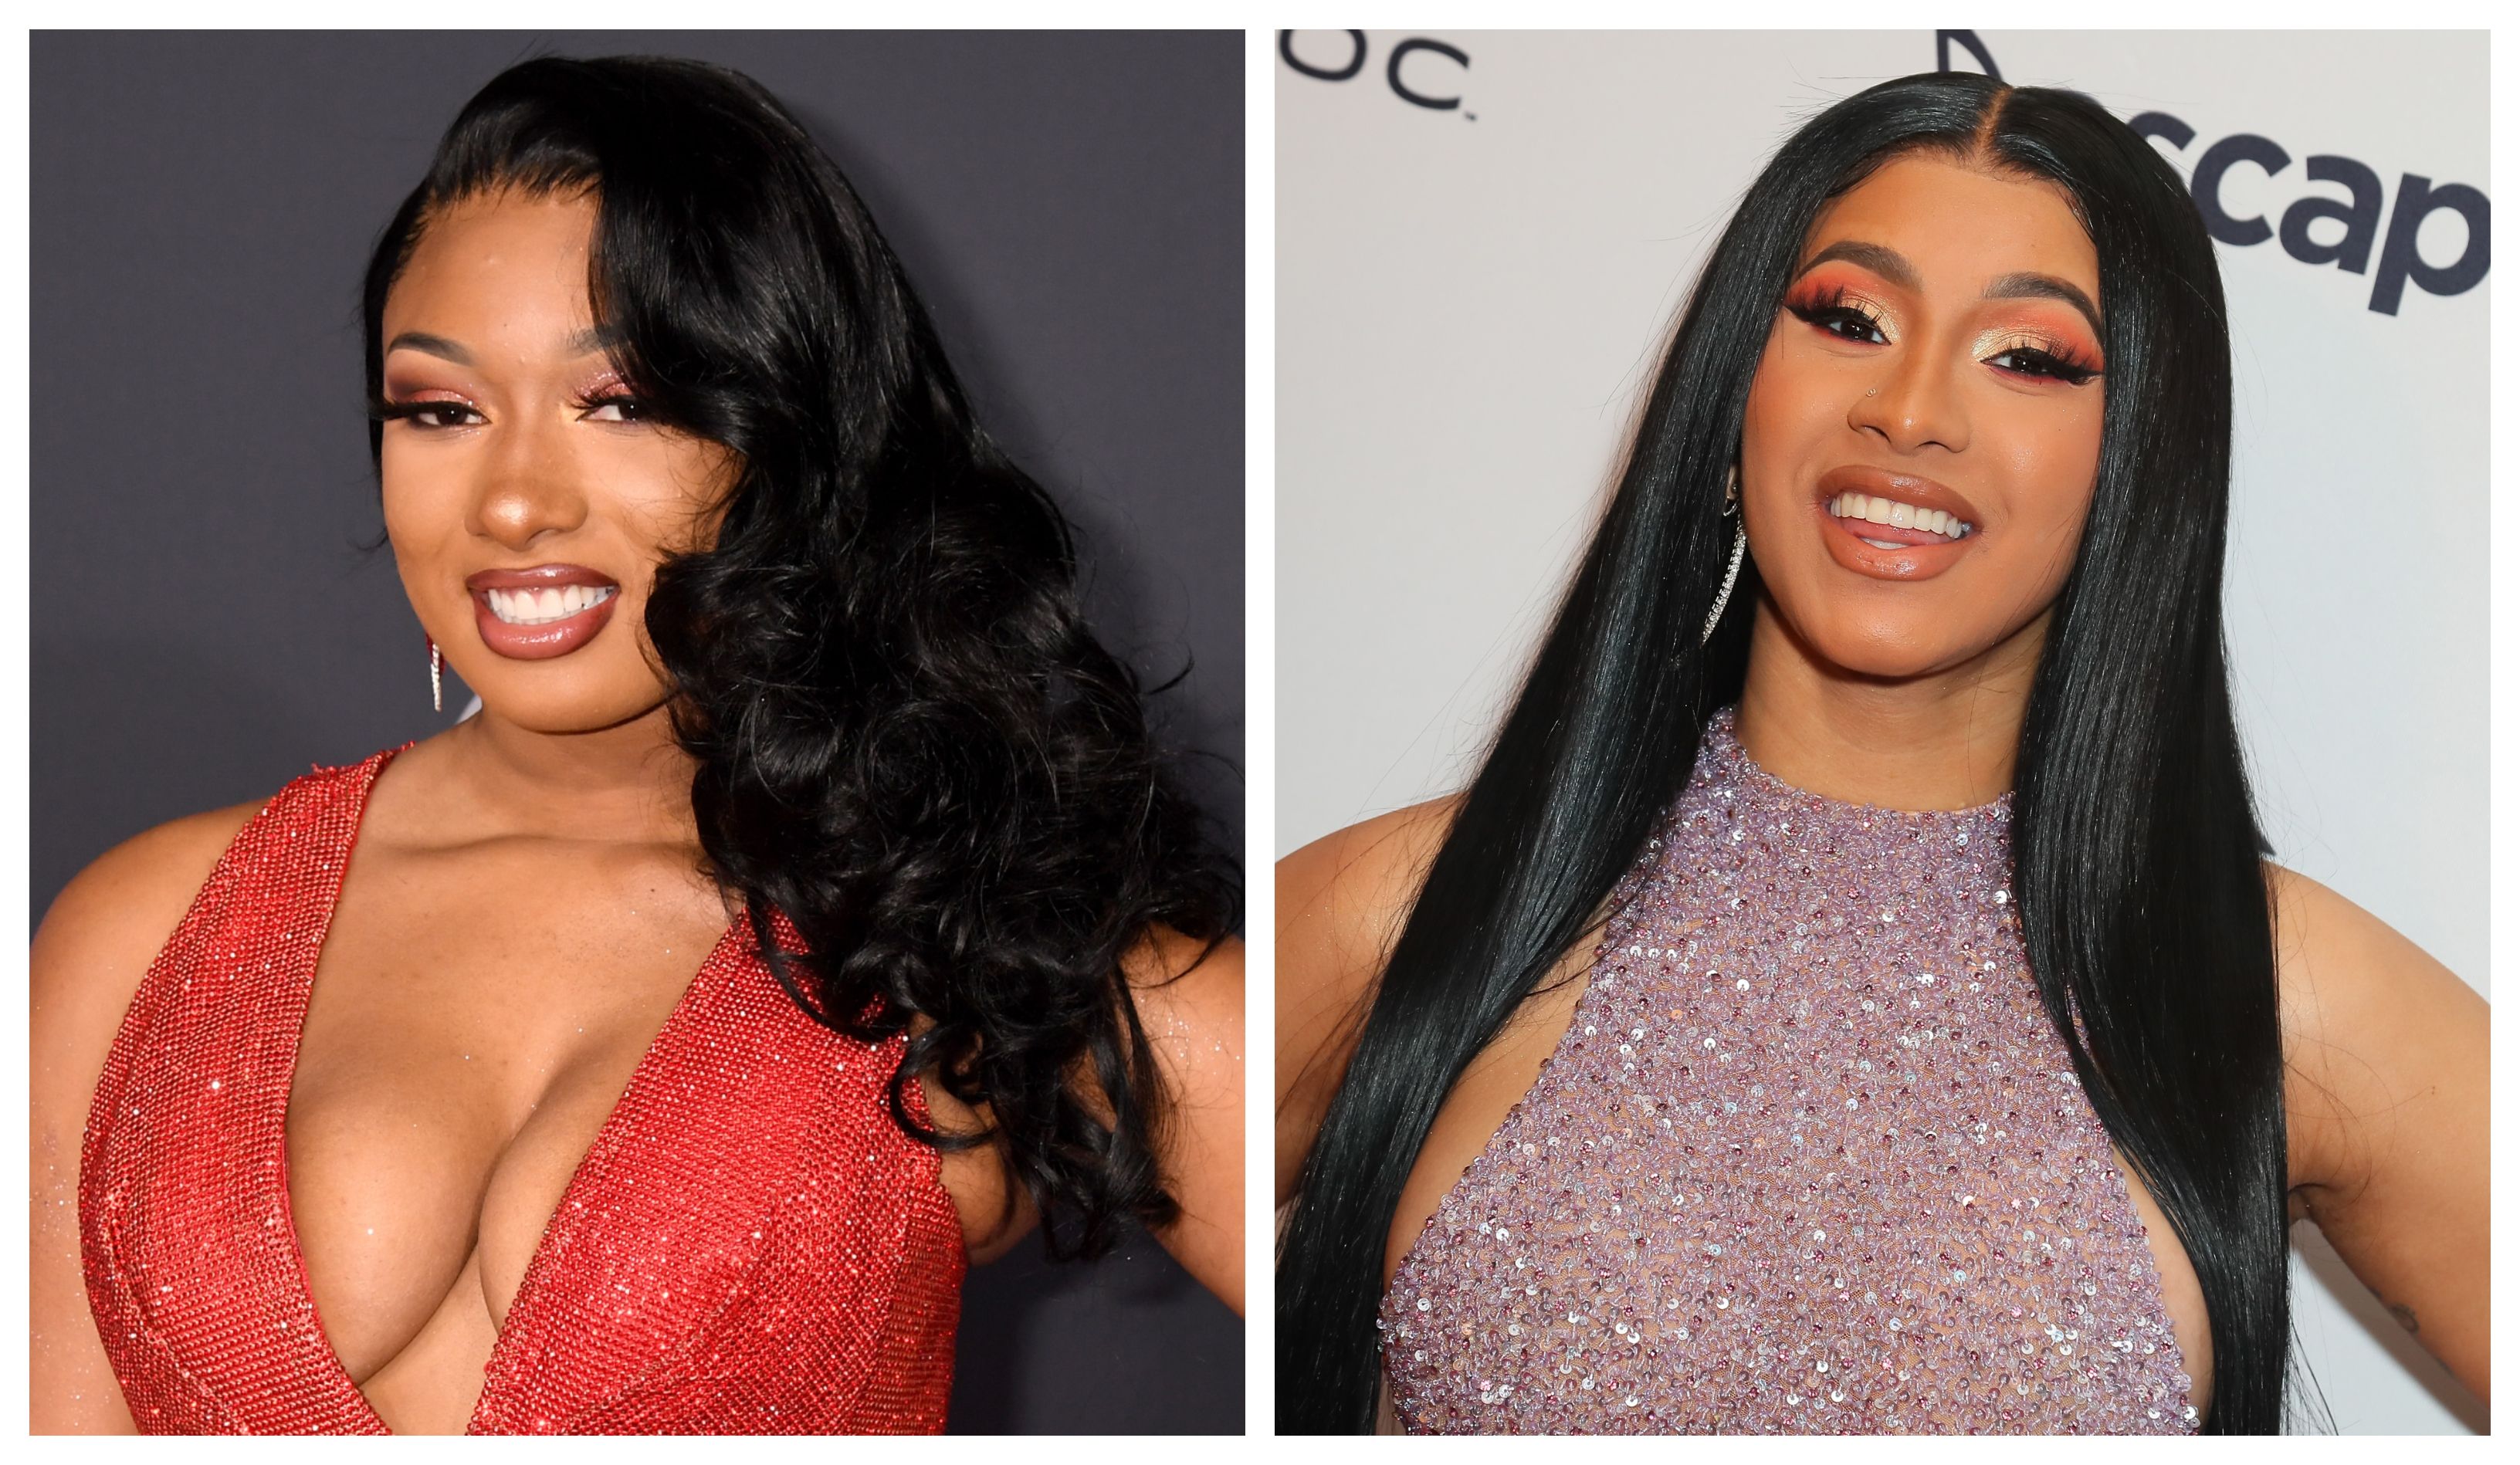 Rappers Megan Thee Stallion and Cardi B release highly.